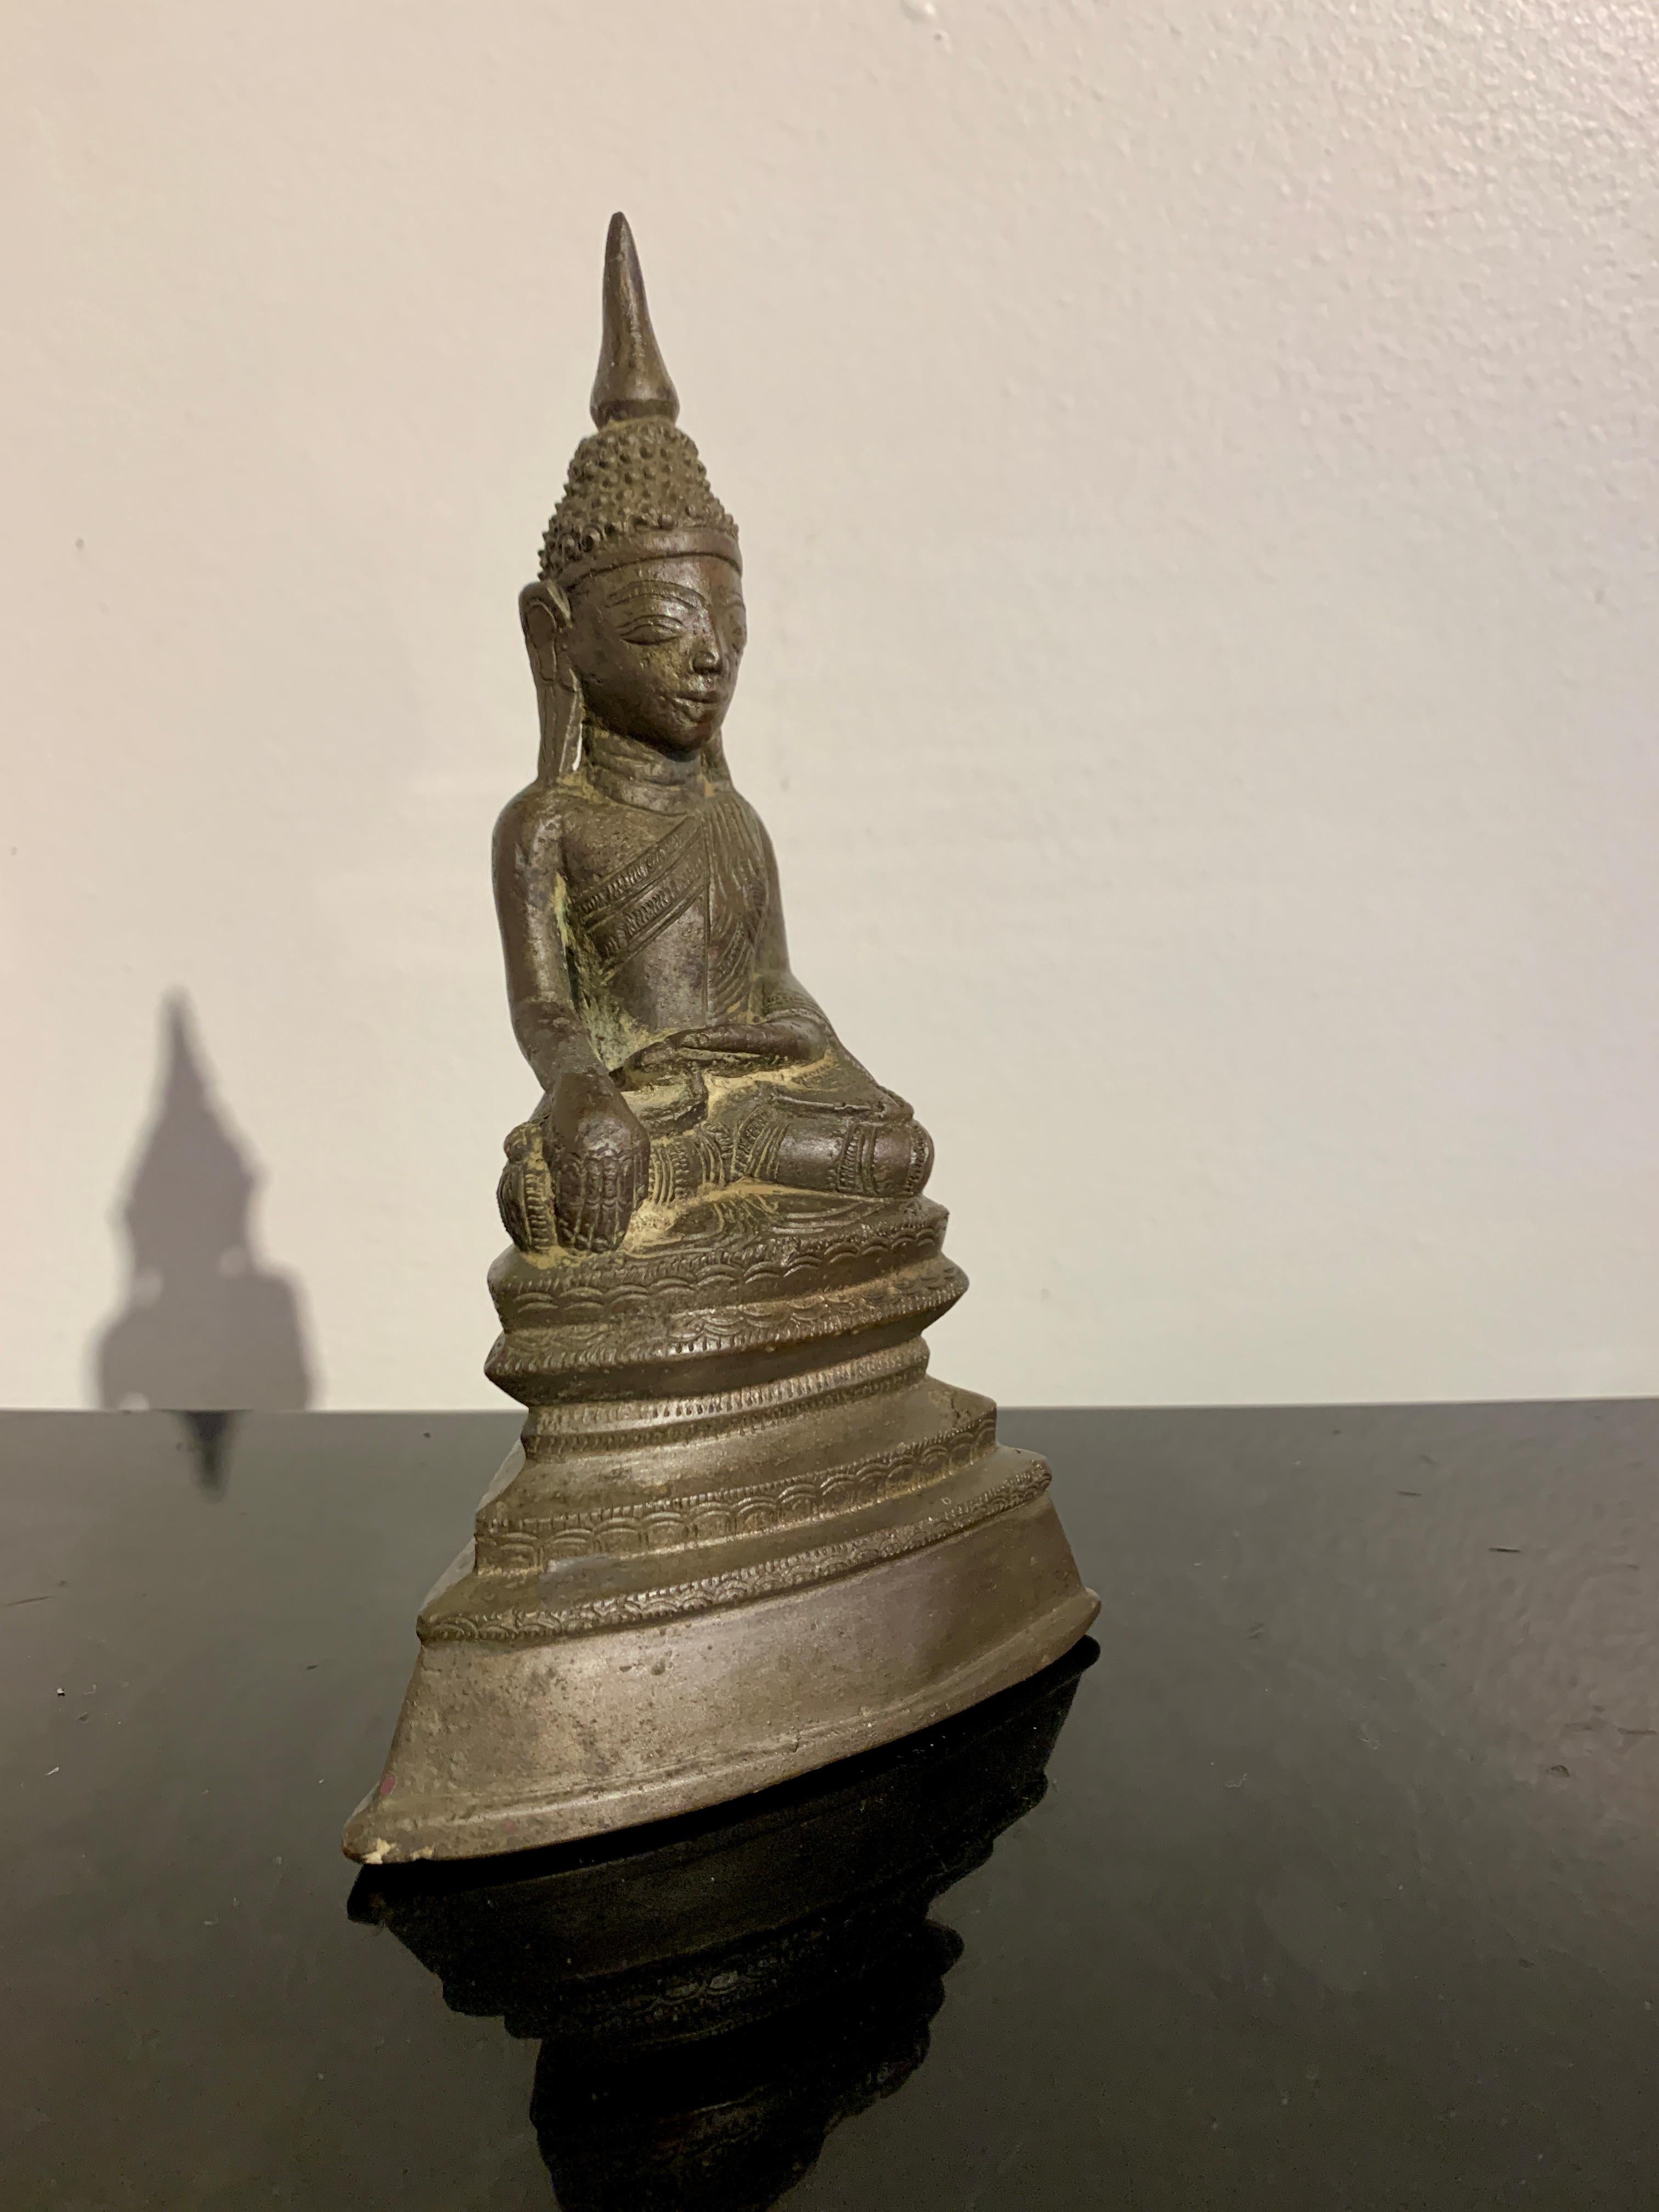 A decidedly charming small cast bronze figure of the Buddha, 18th century, Shan Tai Yai peoples, Burma (Myanmar). 

The small image of the Buddha is portrayed seated in full lotus position, both soles of the feet pointed upwards. His hands perform